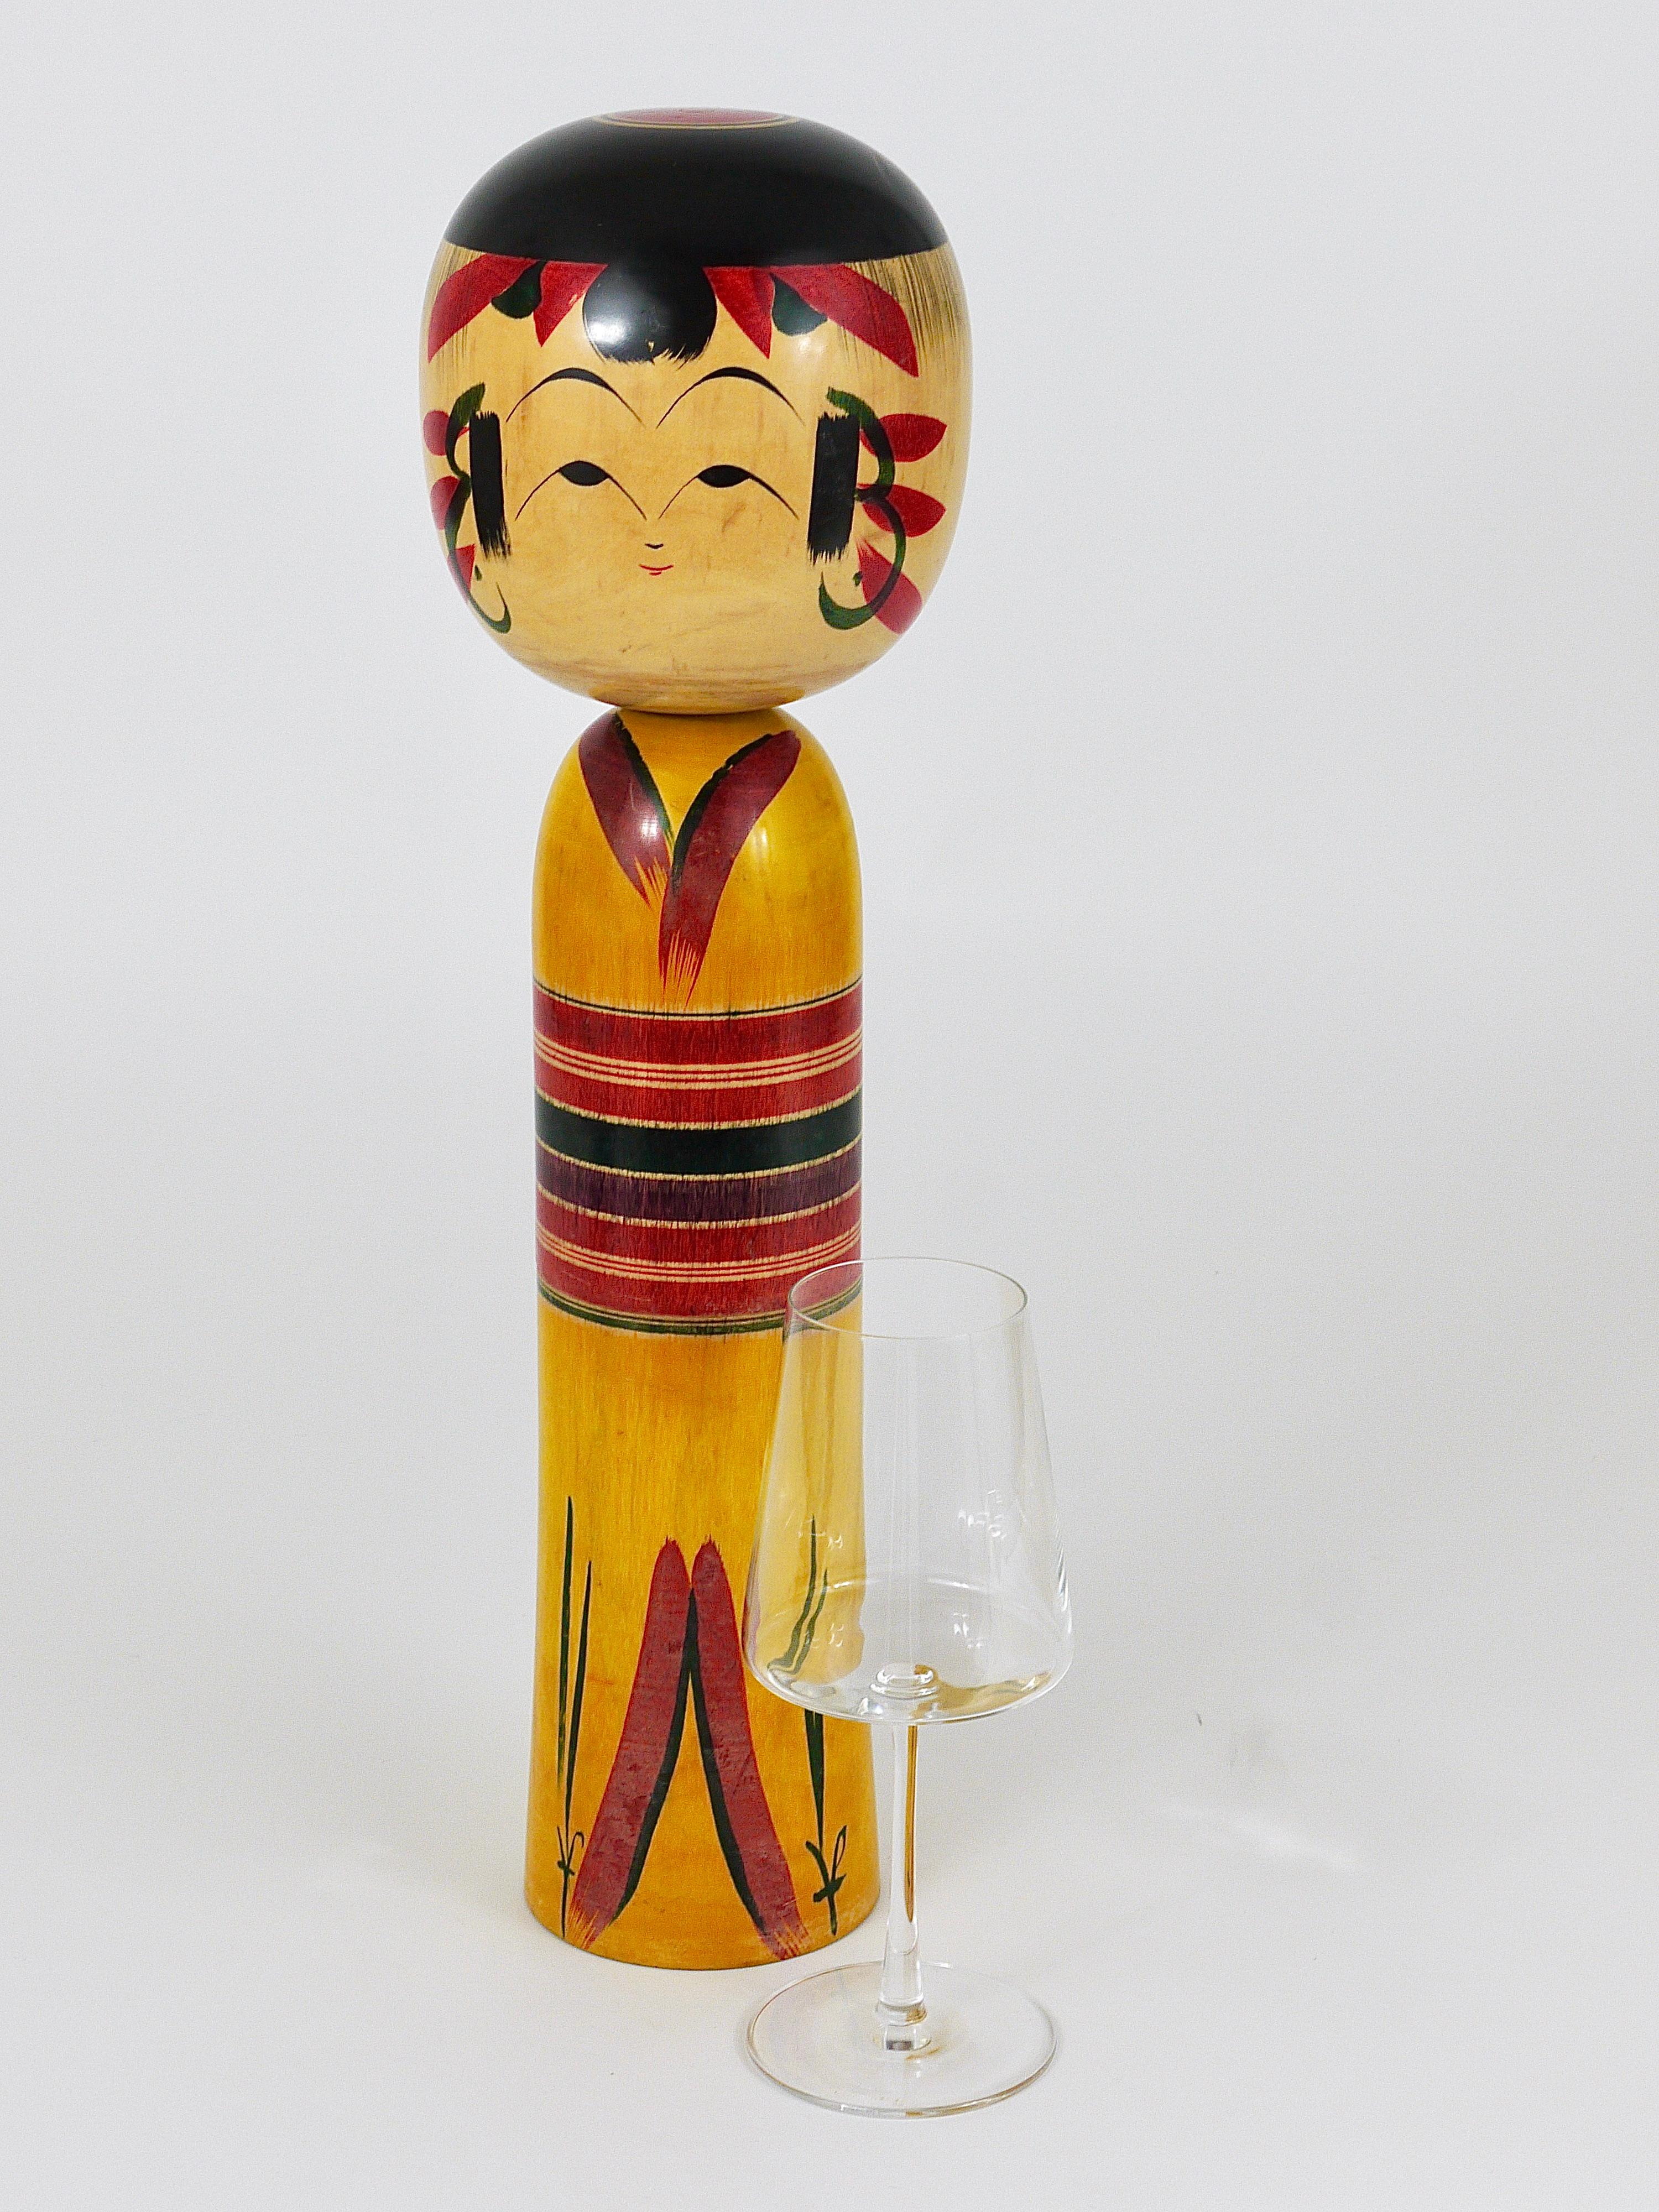 Hand-Carved Decorative Kokeshi Doll Sculpture from Northern Japan, Hand-Painted, Signed